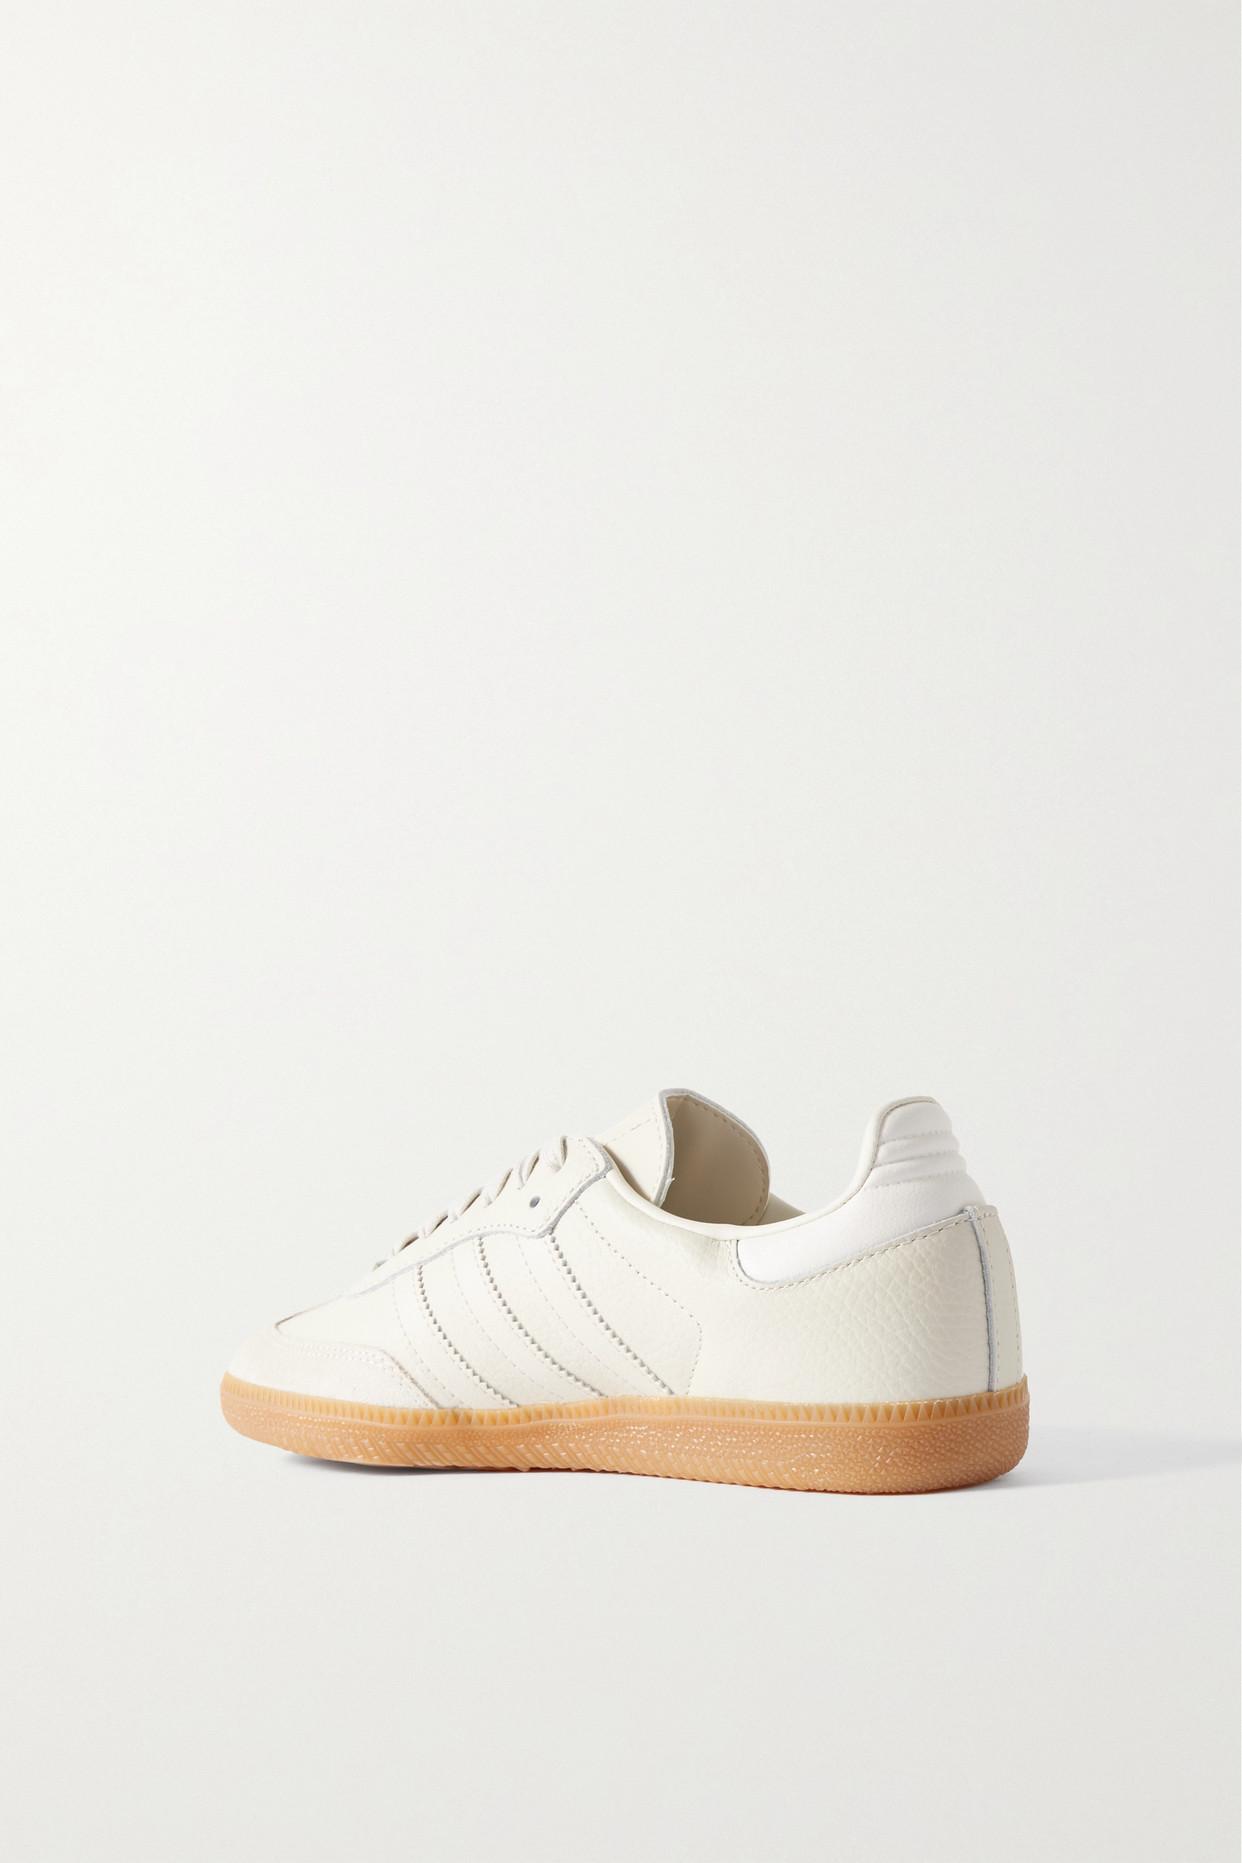 adidas Originals Samba Og Suede-trimmed Leather Sneakers in White | Lyst